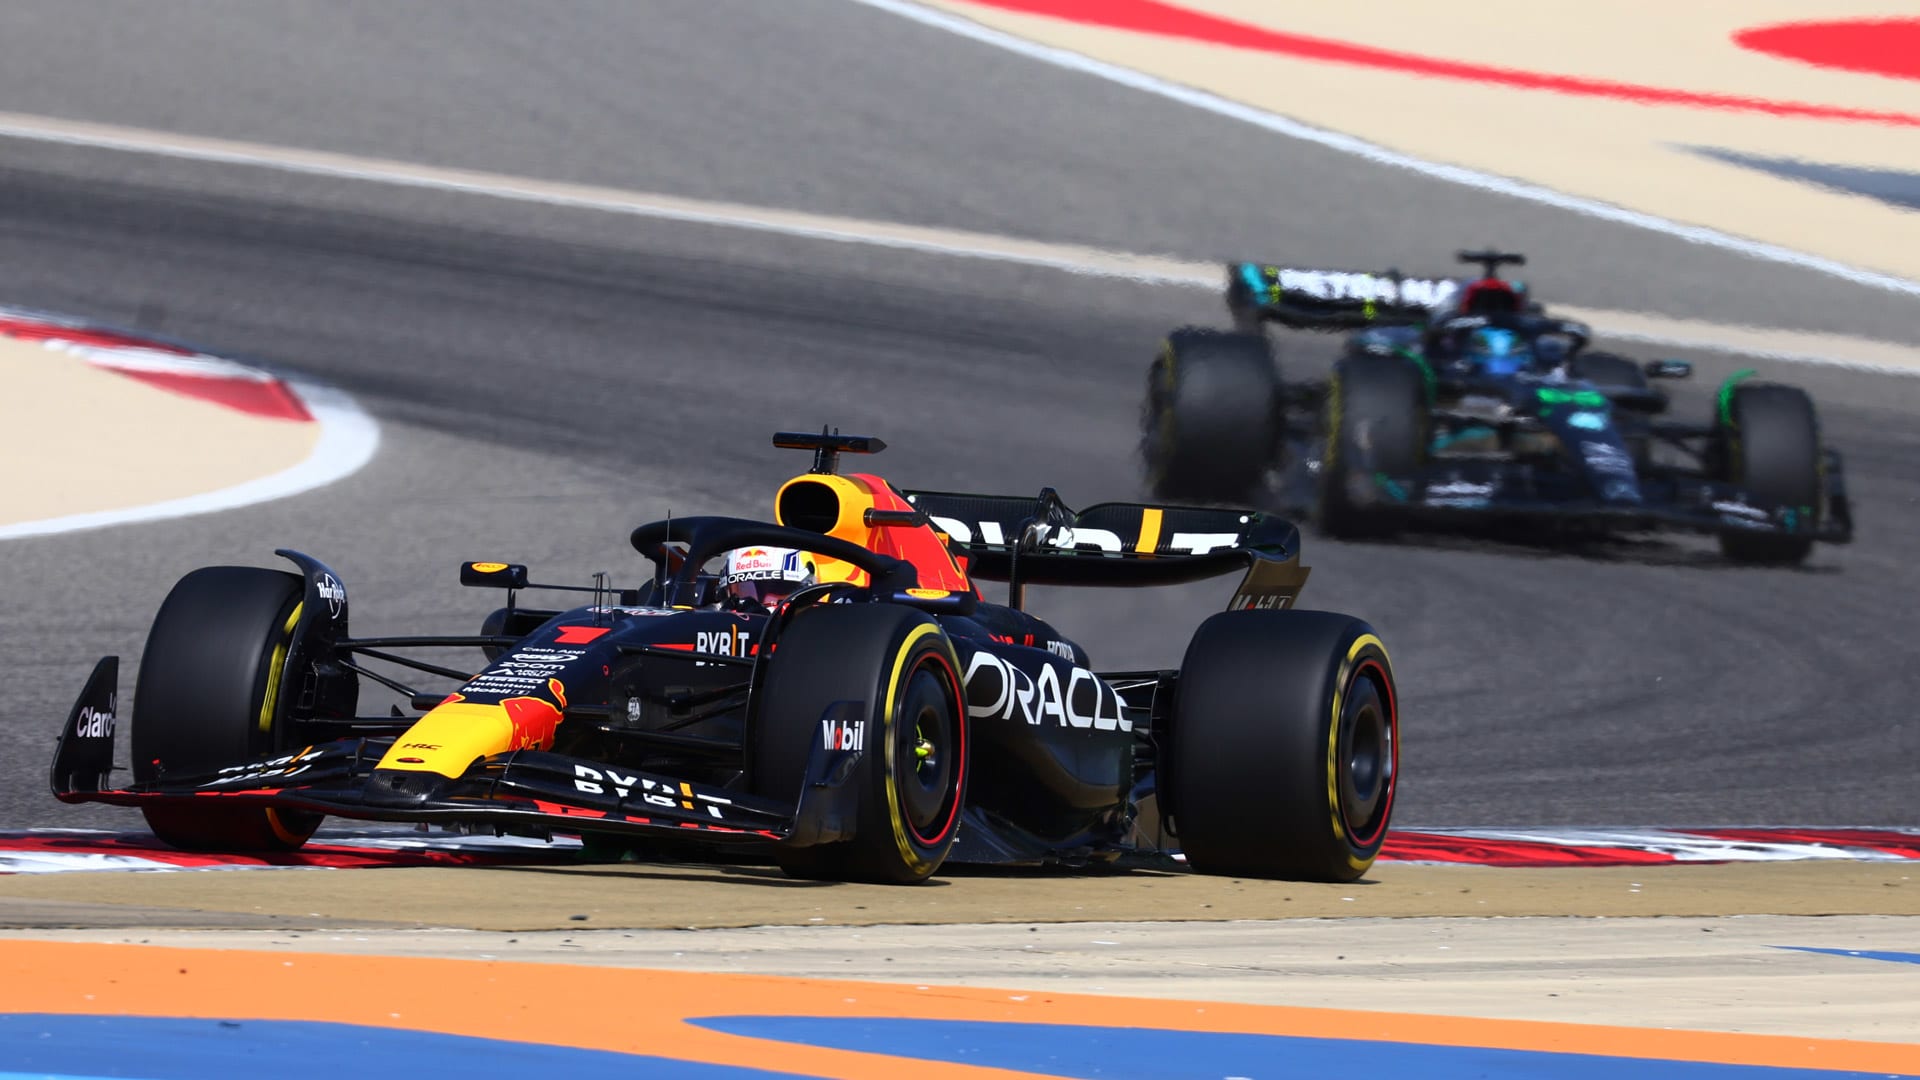 ANALYSIS What did the opening day of 2023 testing imply about the pace of Red Bull, Ferrari and Mercedes? Formula 1®